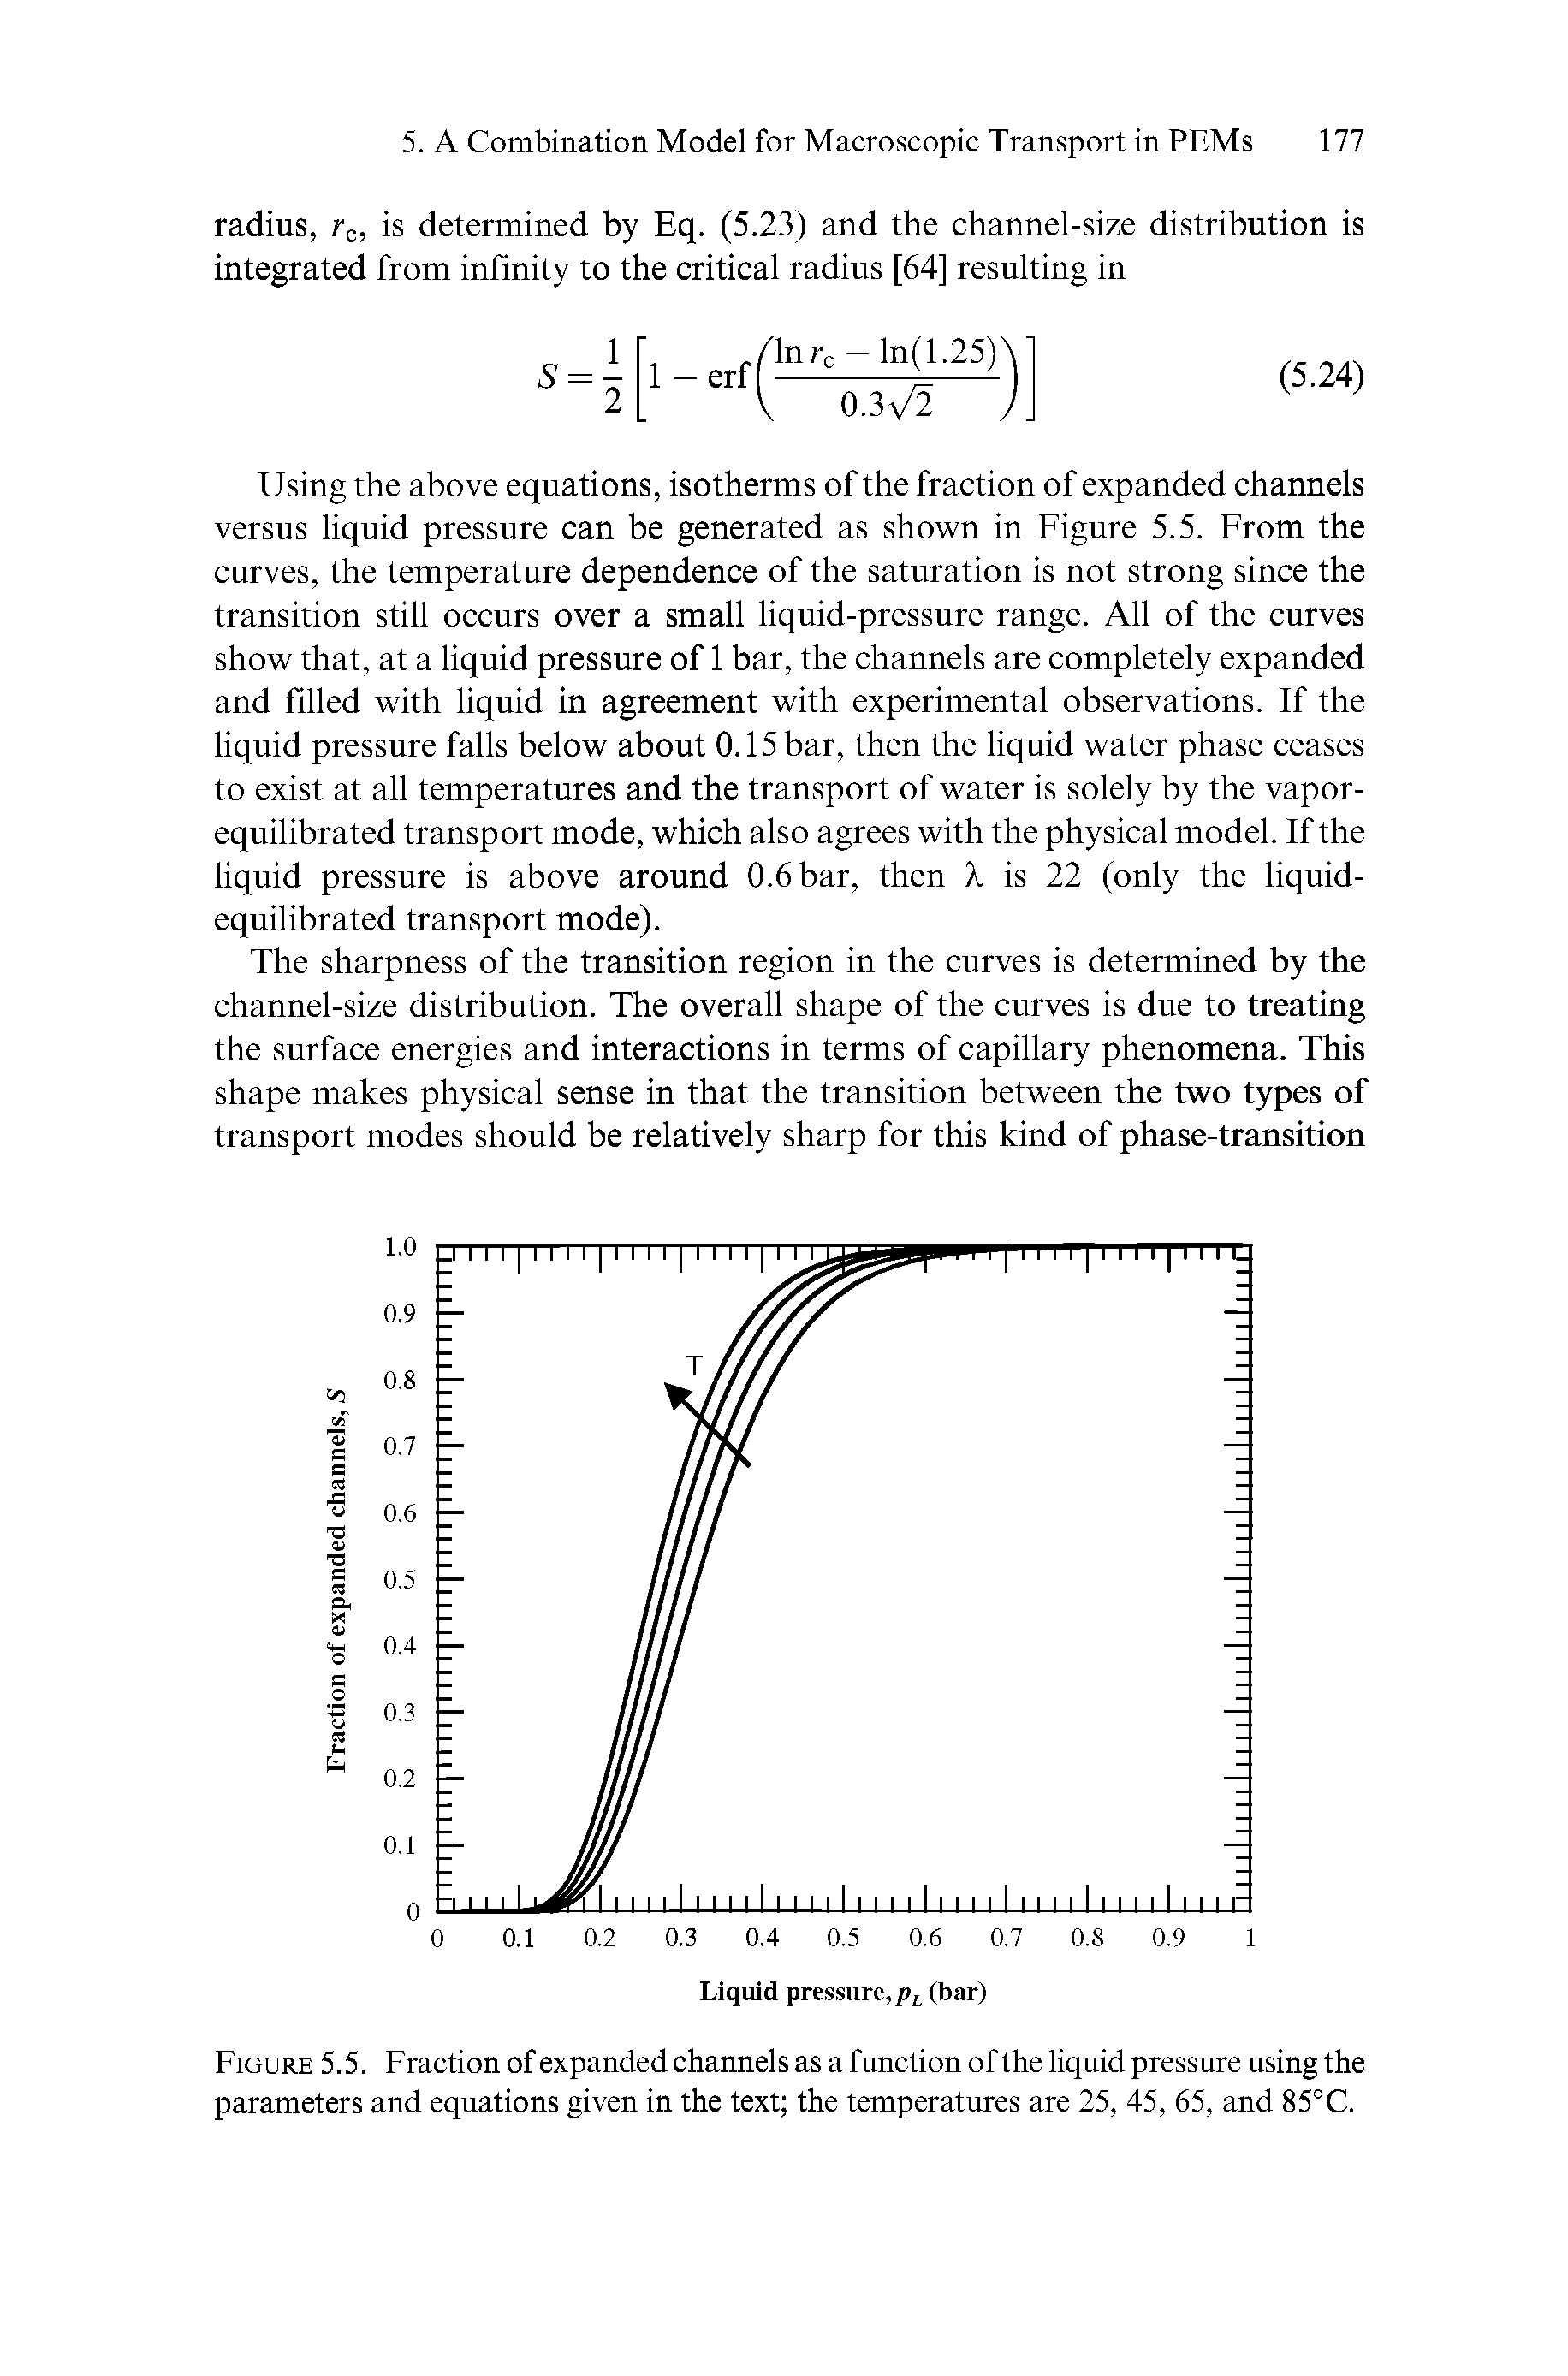 Figure 5.5. Fraction of expanded channels as a function of the liquid pressure using the parameters and equations given in the text the temperatures are 25, 45, 65, and 85°C.